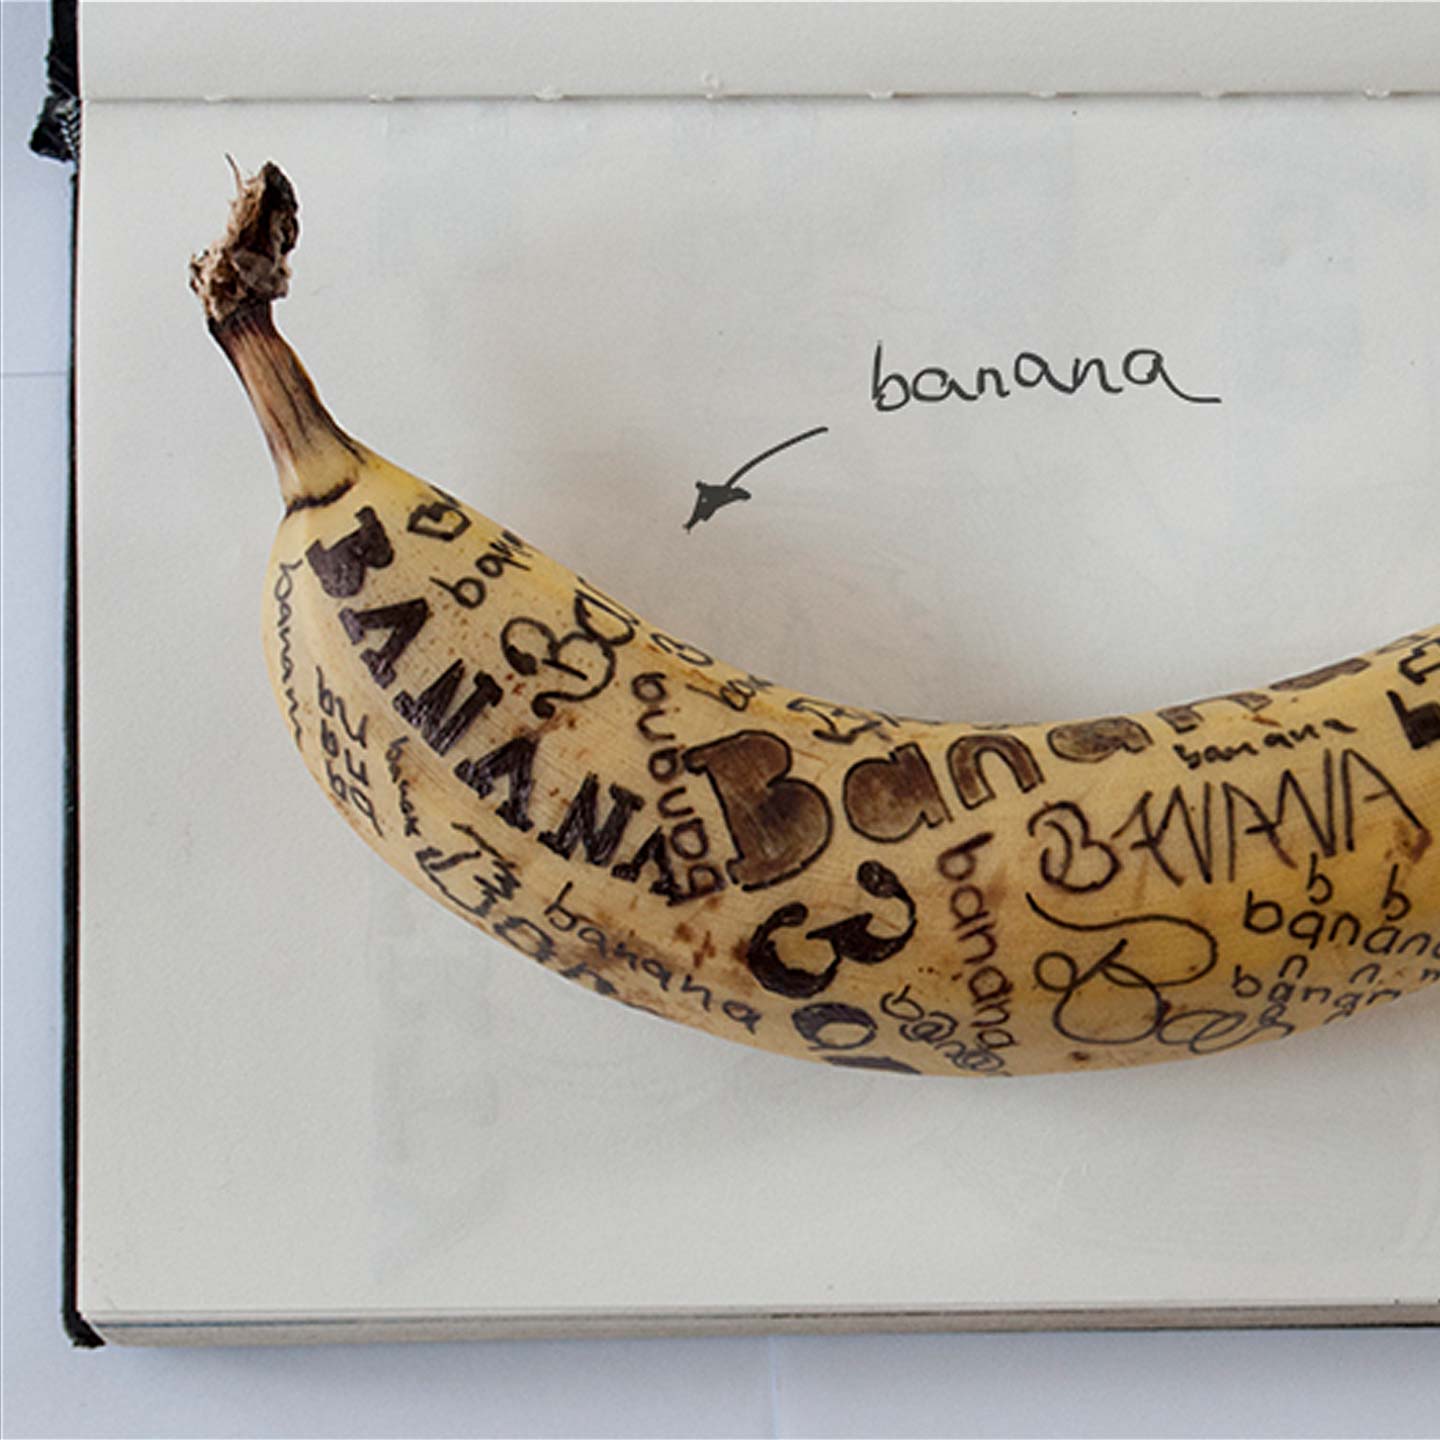 Banana Illustration by the freelance art director Christoph Gey from Cologne